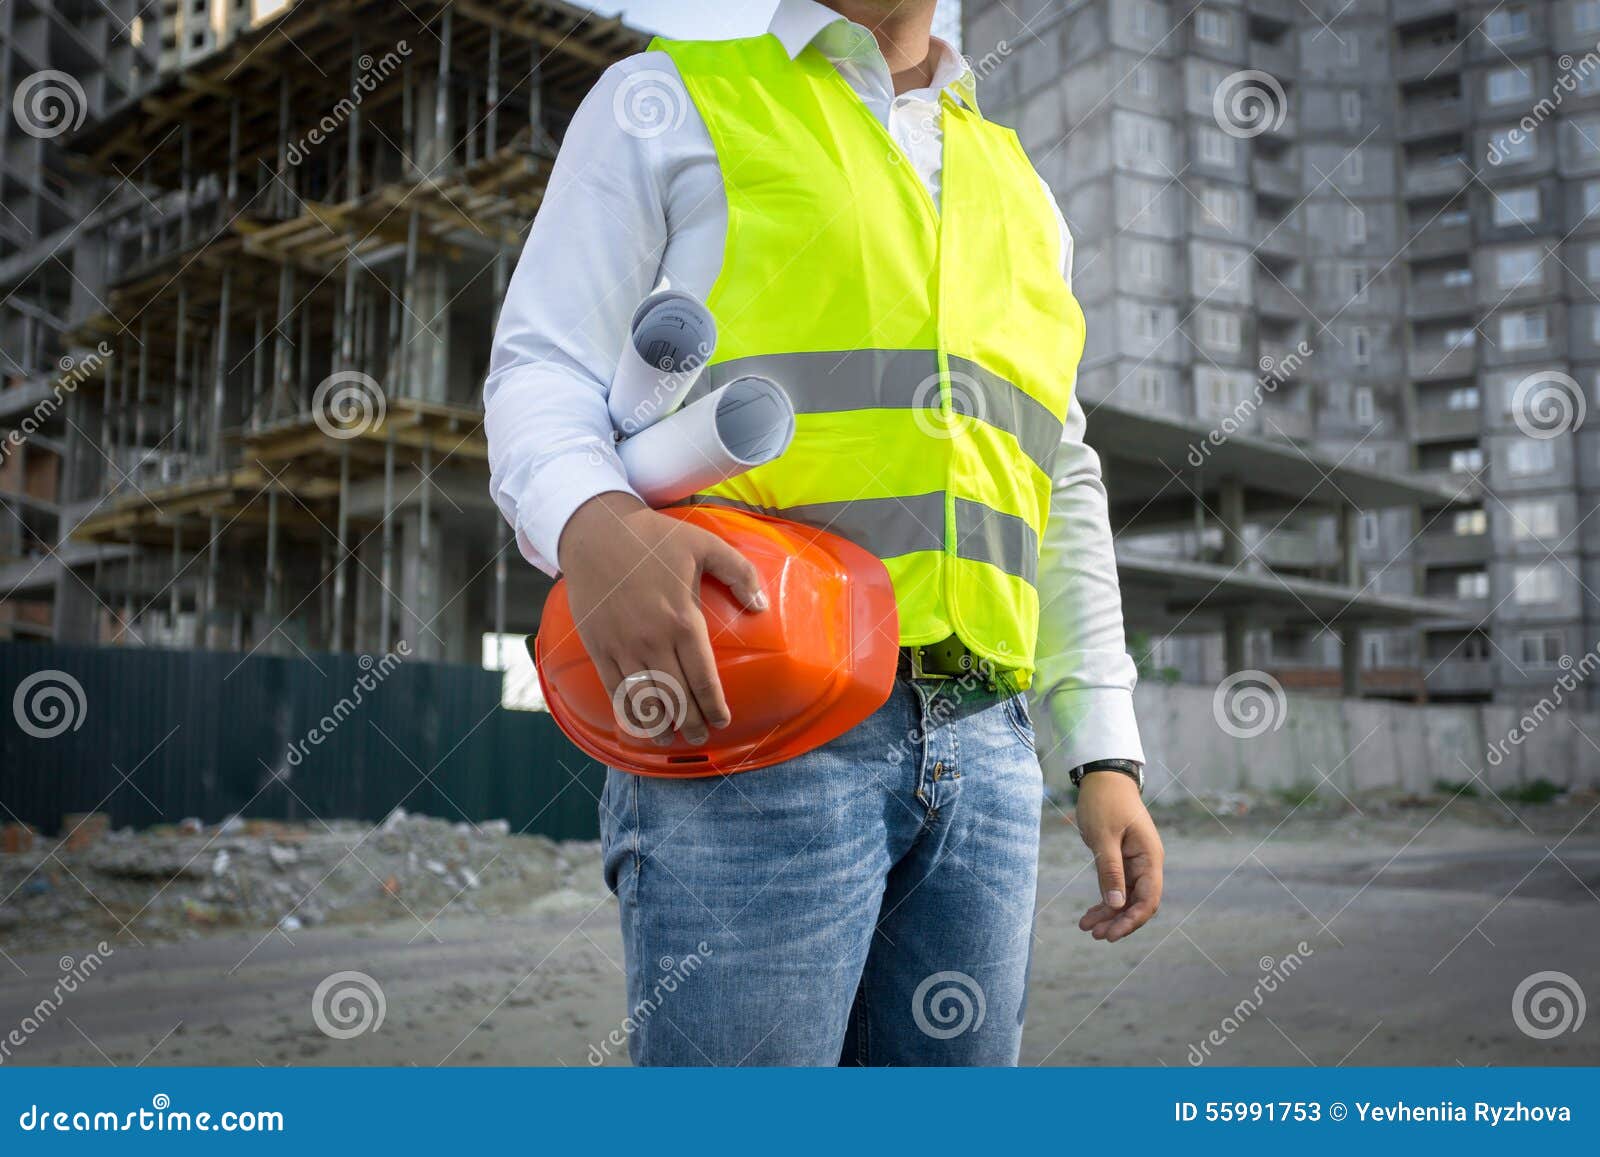 Architect in Jacket Posing with Red Helmet at Construction Site